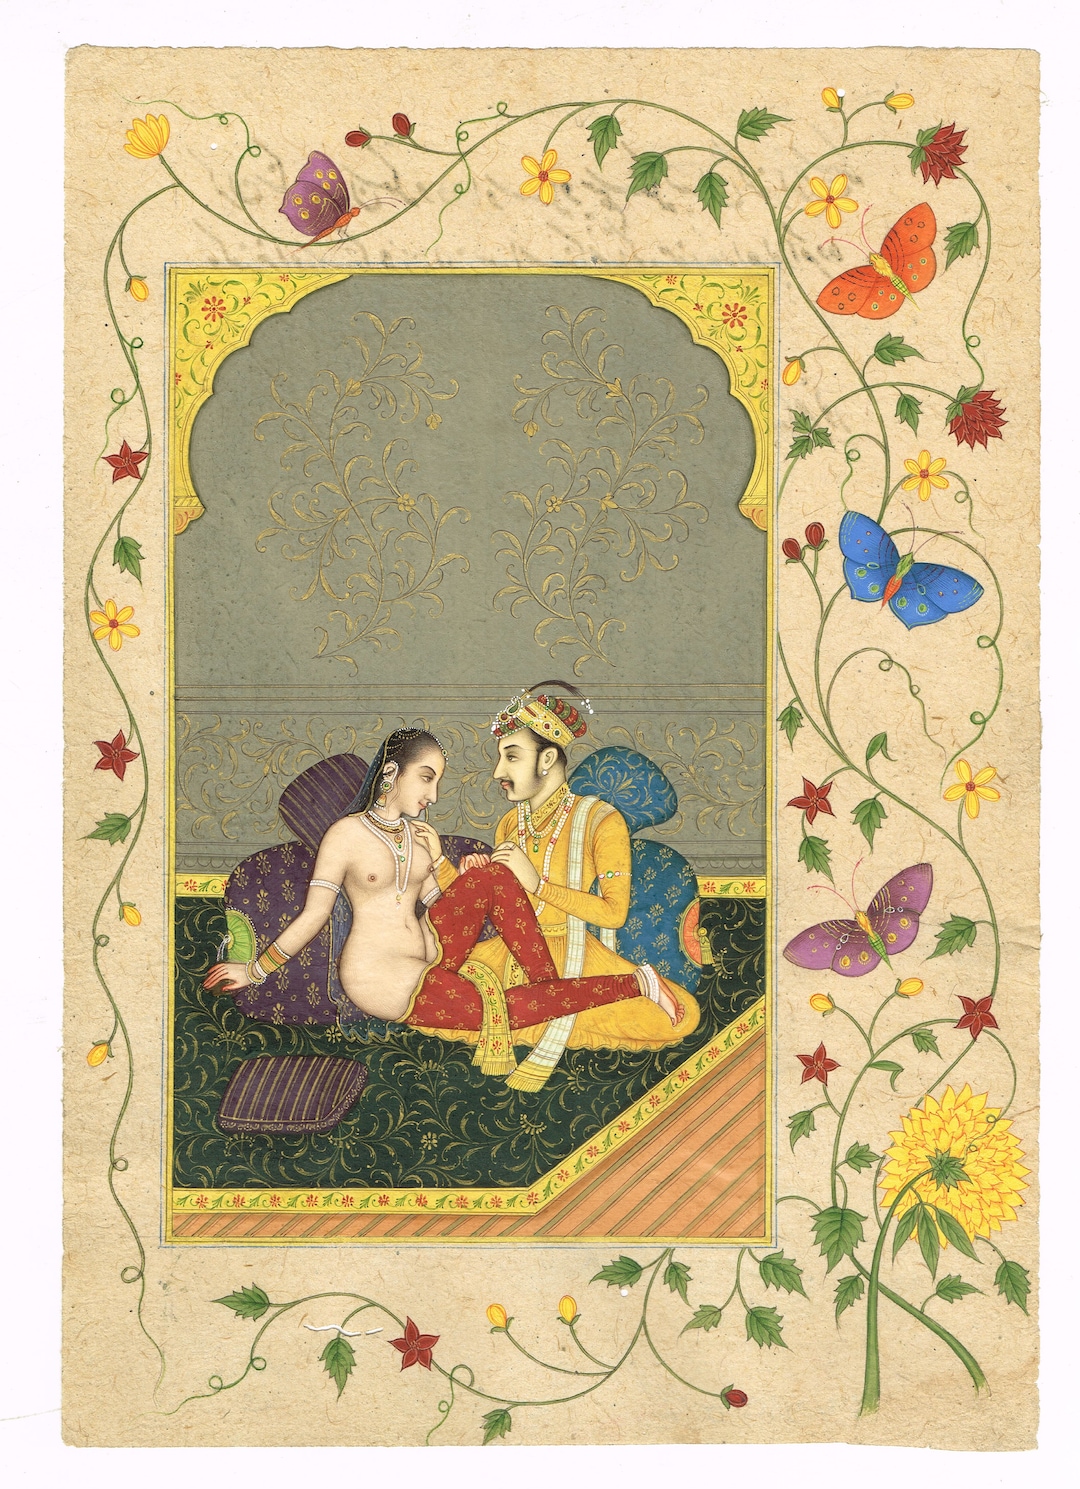 Mughal Kamasutra Art Painting of King and Nude Queen in - Etsy